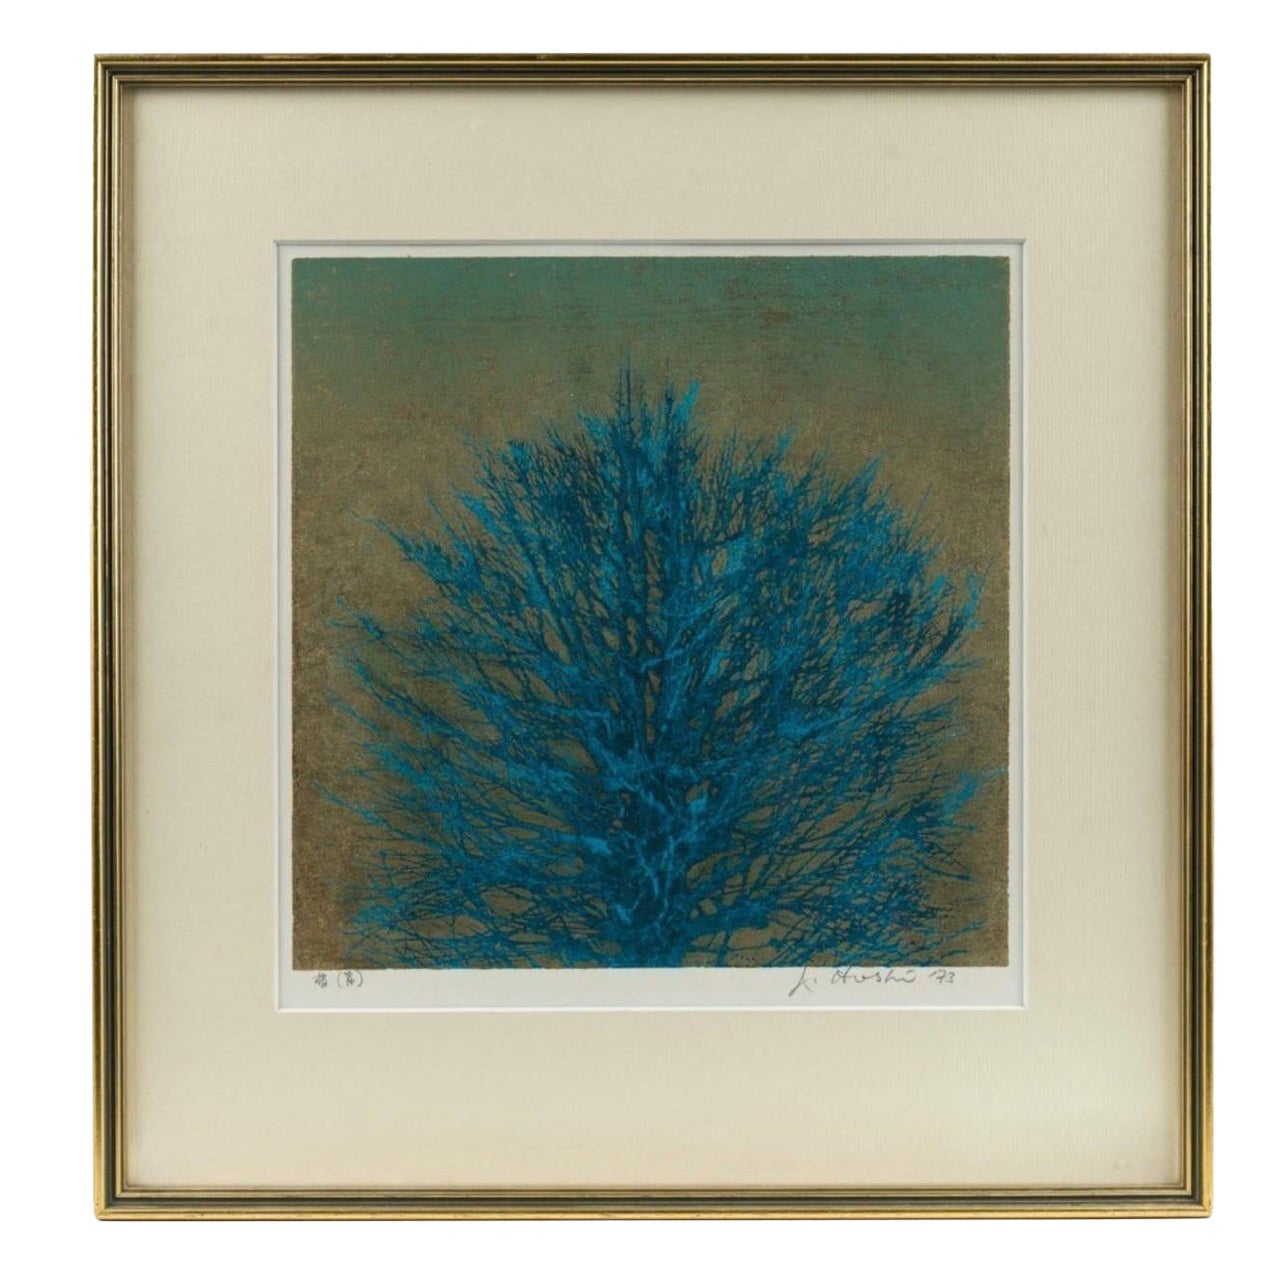 JOICHI HOSHI (1911-1979), Blue Tree, Woodblock, signed lower right, Dated 1973 For Sale